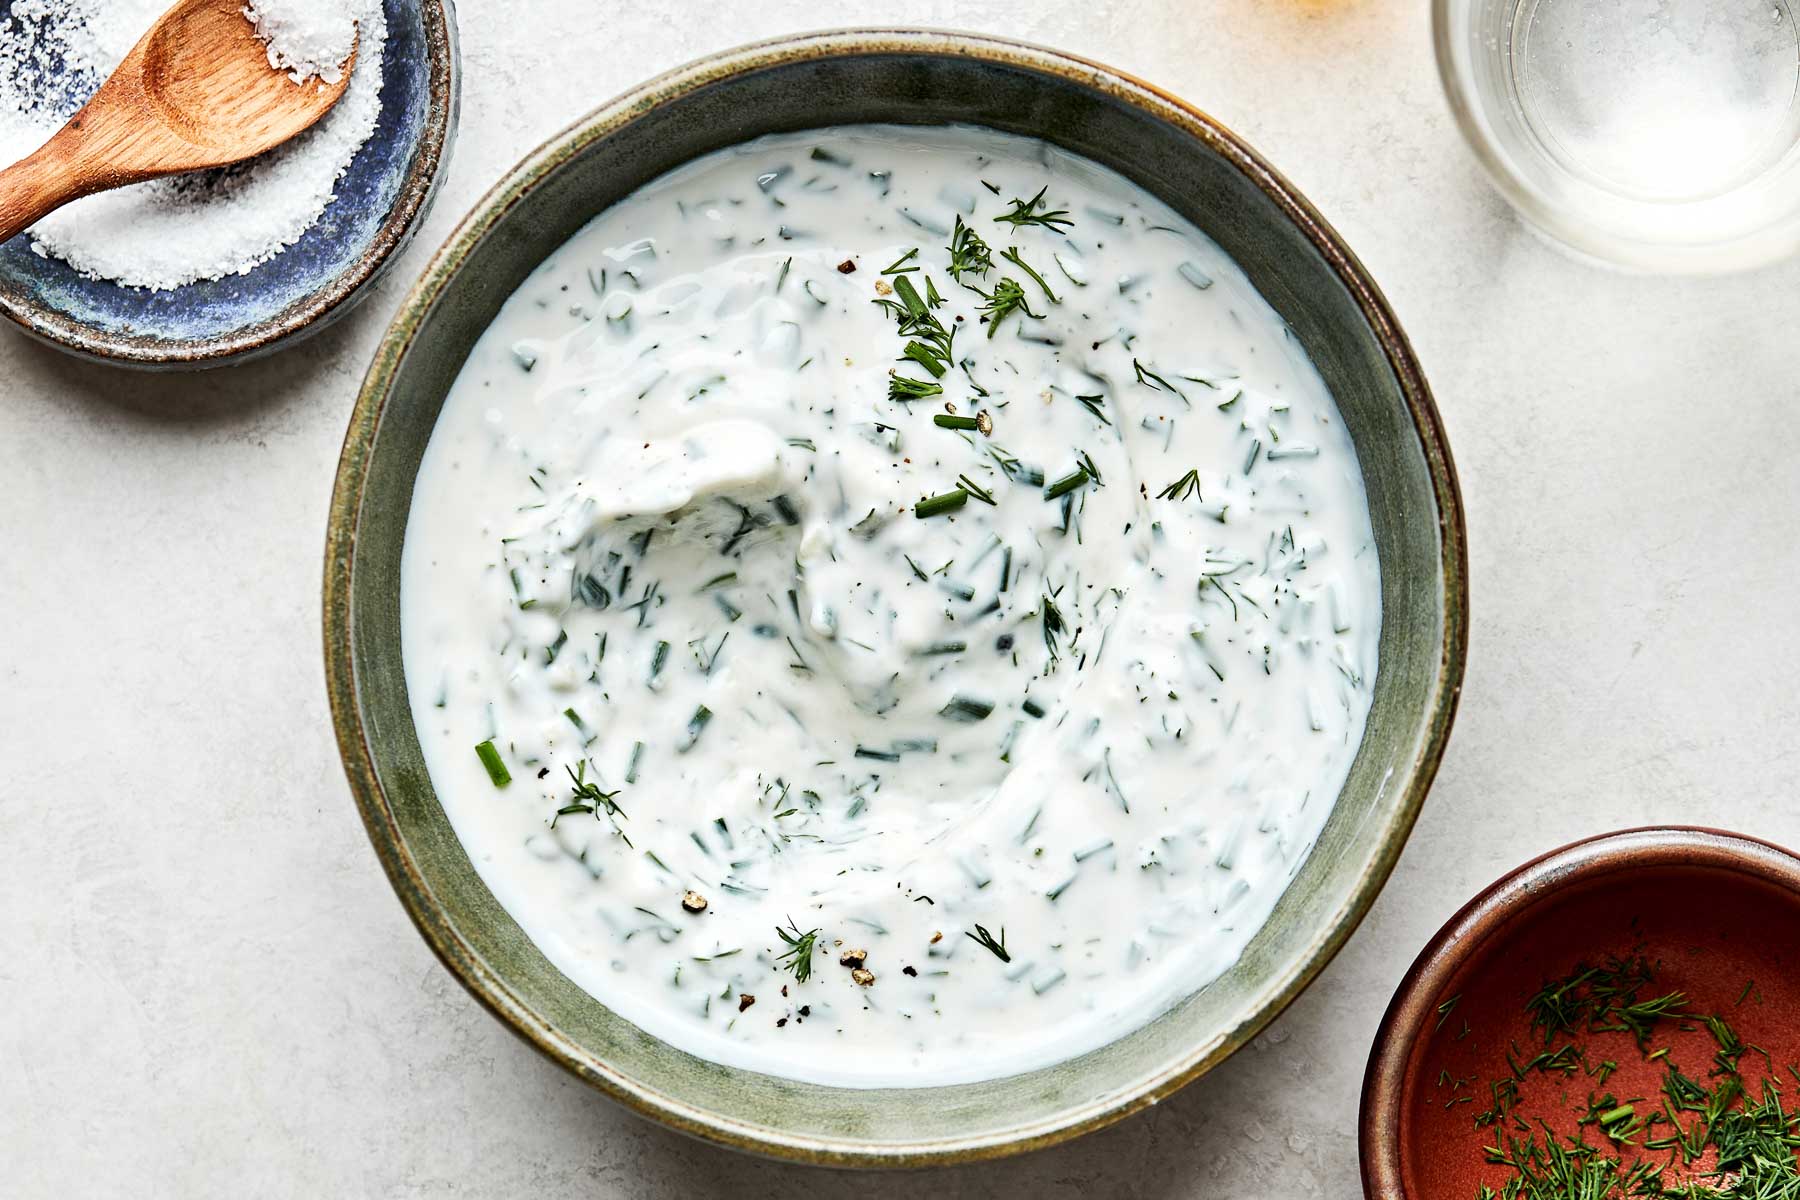 An overhead shot of greek yogurt ranch dressing in a green stoneware bowl stop a white marbled surface. Dishes of water, dill, and salt sit alongside the bowl.